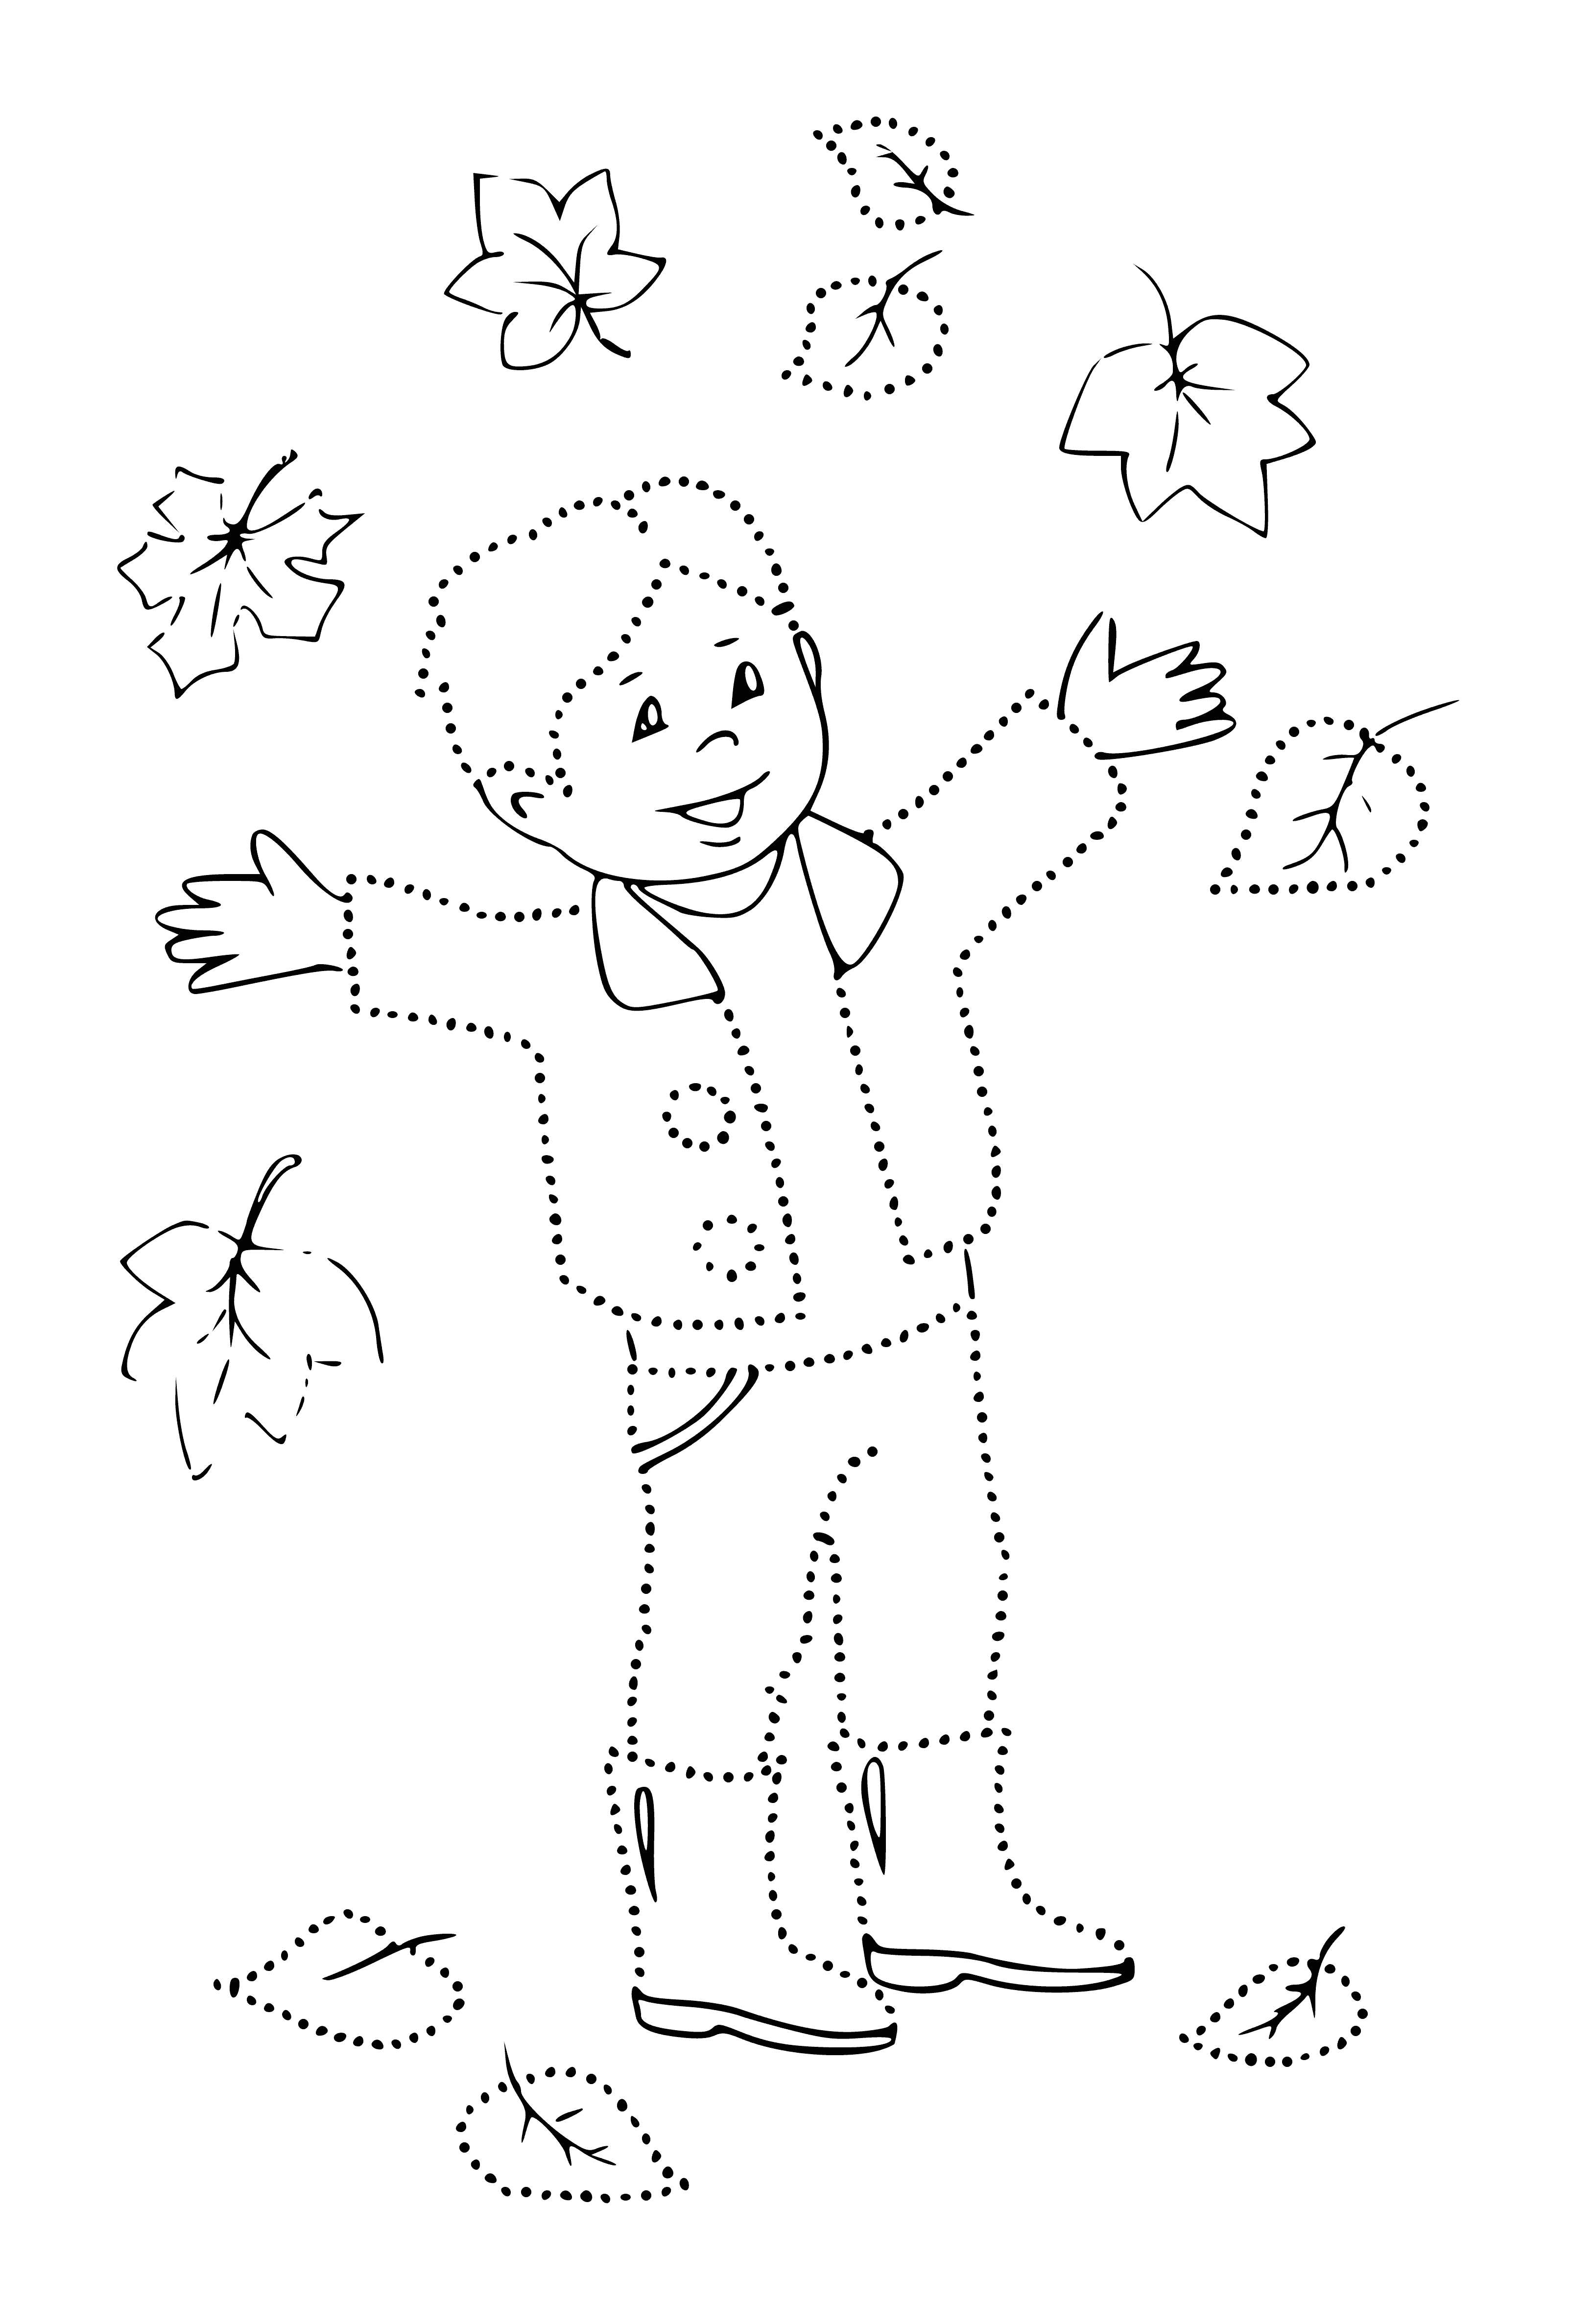 coloring page: Boy playing with colorful leaves in the autumn breeze, with a huge smile on his face. #AutumnVibes